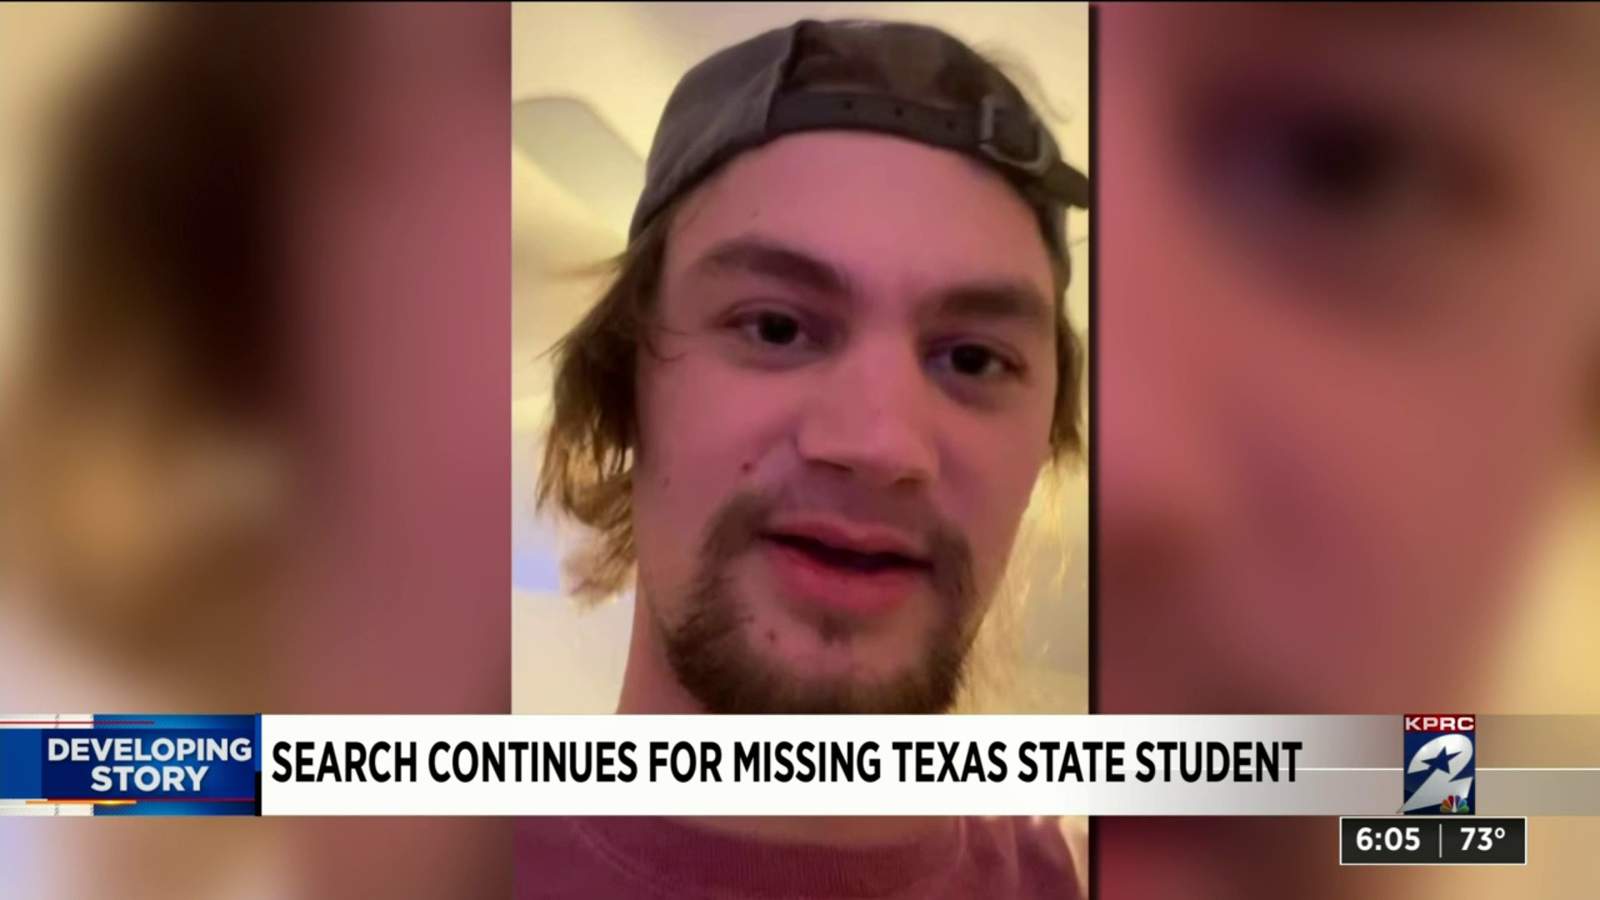 100-member team spend weekend searching for student missing for months